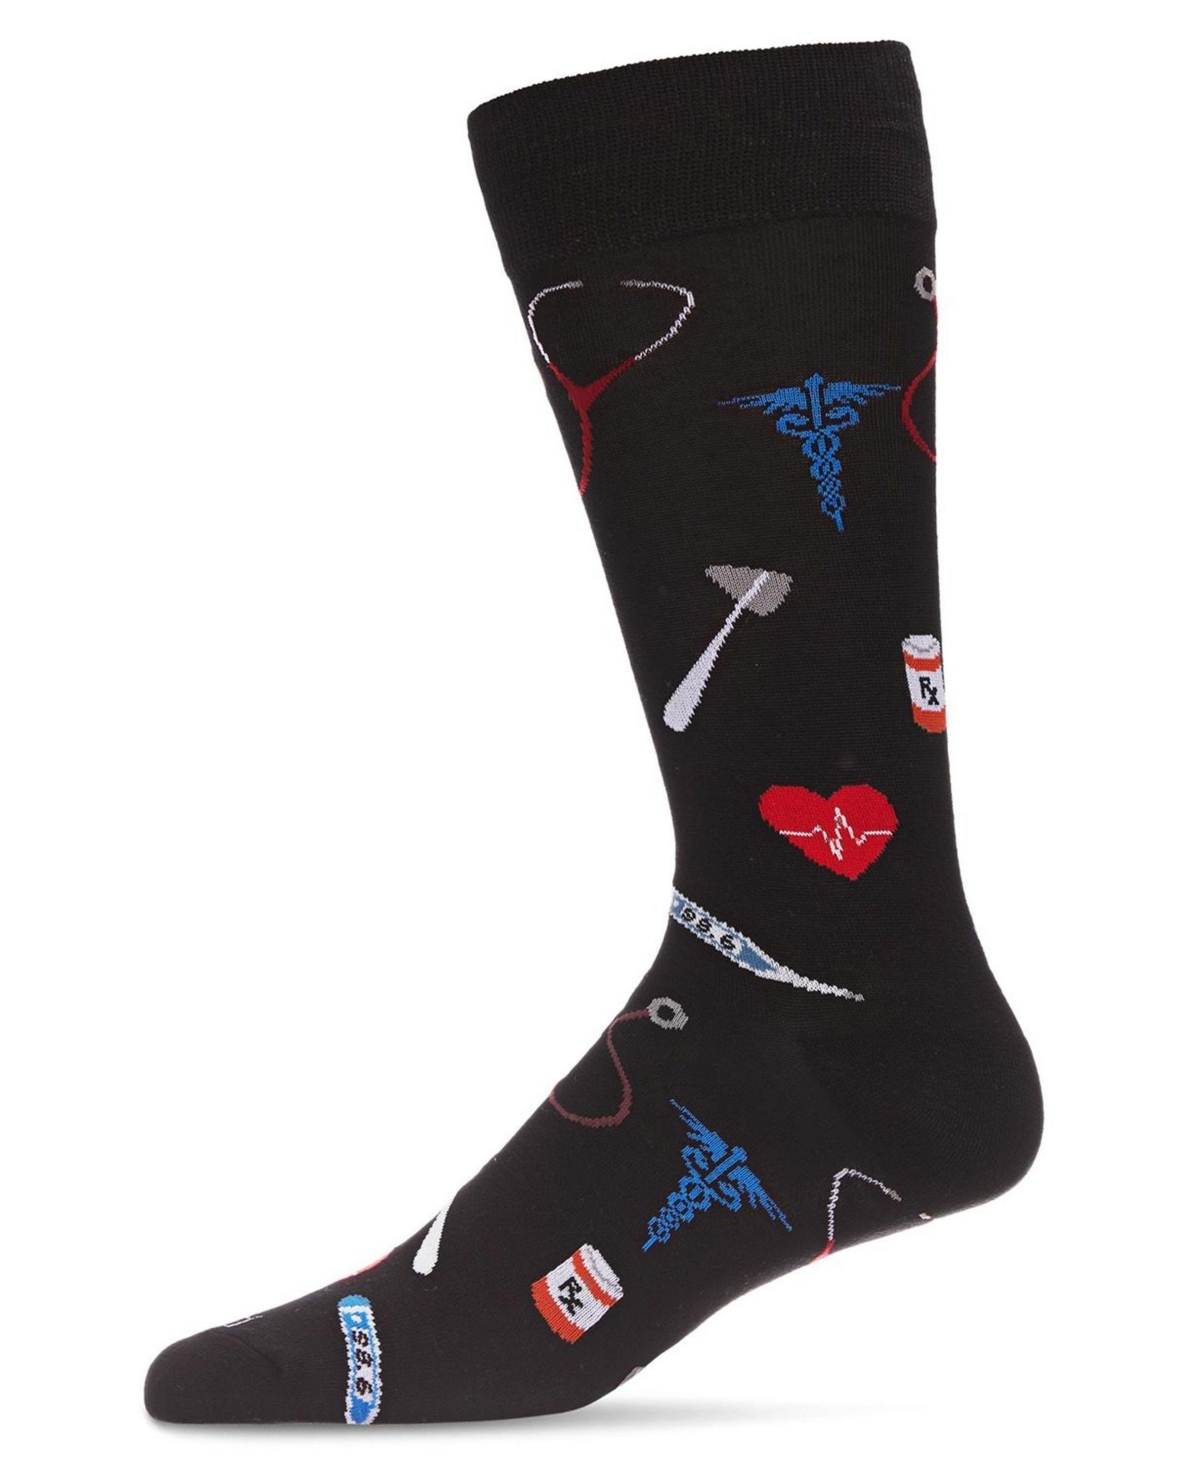 Men's Medical Doctor Rayon from Bamboo Novelty Crew Socks - Black